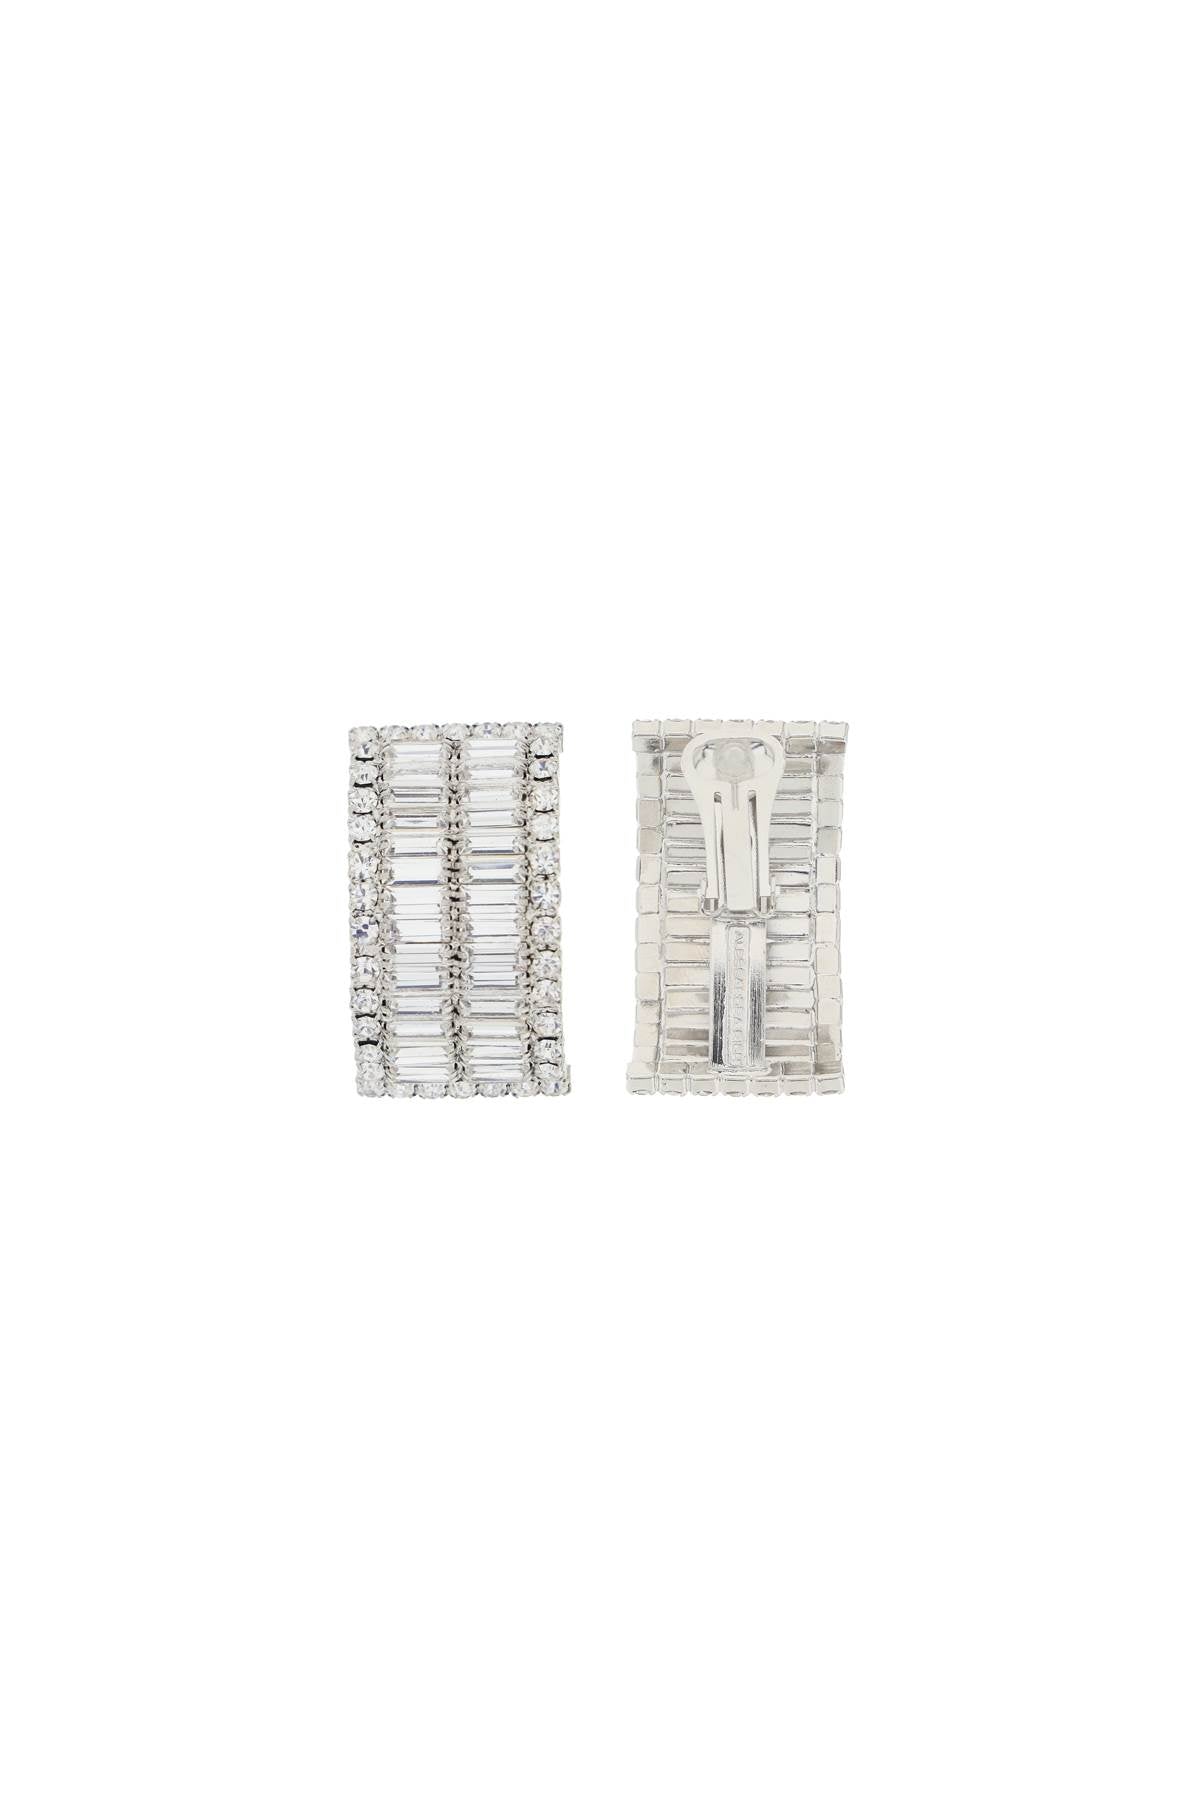 Alessandra rich clip-on earrings with crystals-women > accessories > jewellery > earrings-Alessandra Rich-os-Silver-Urbanheer